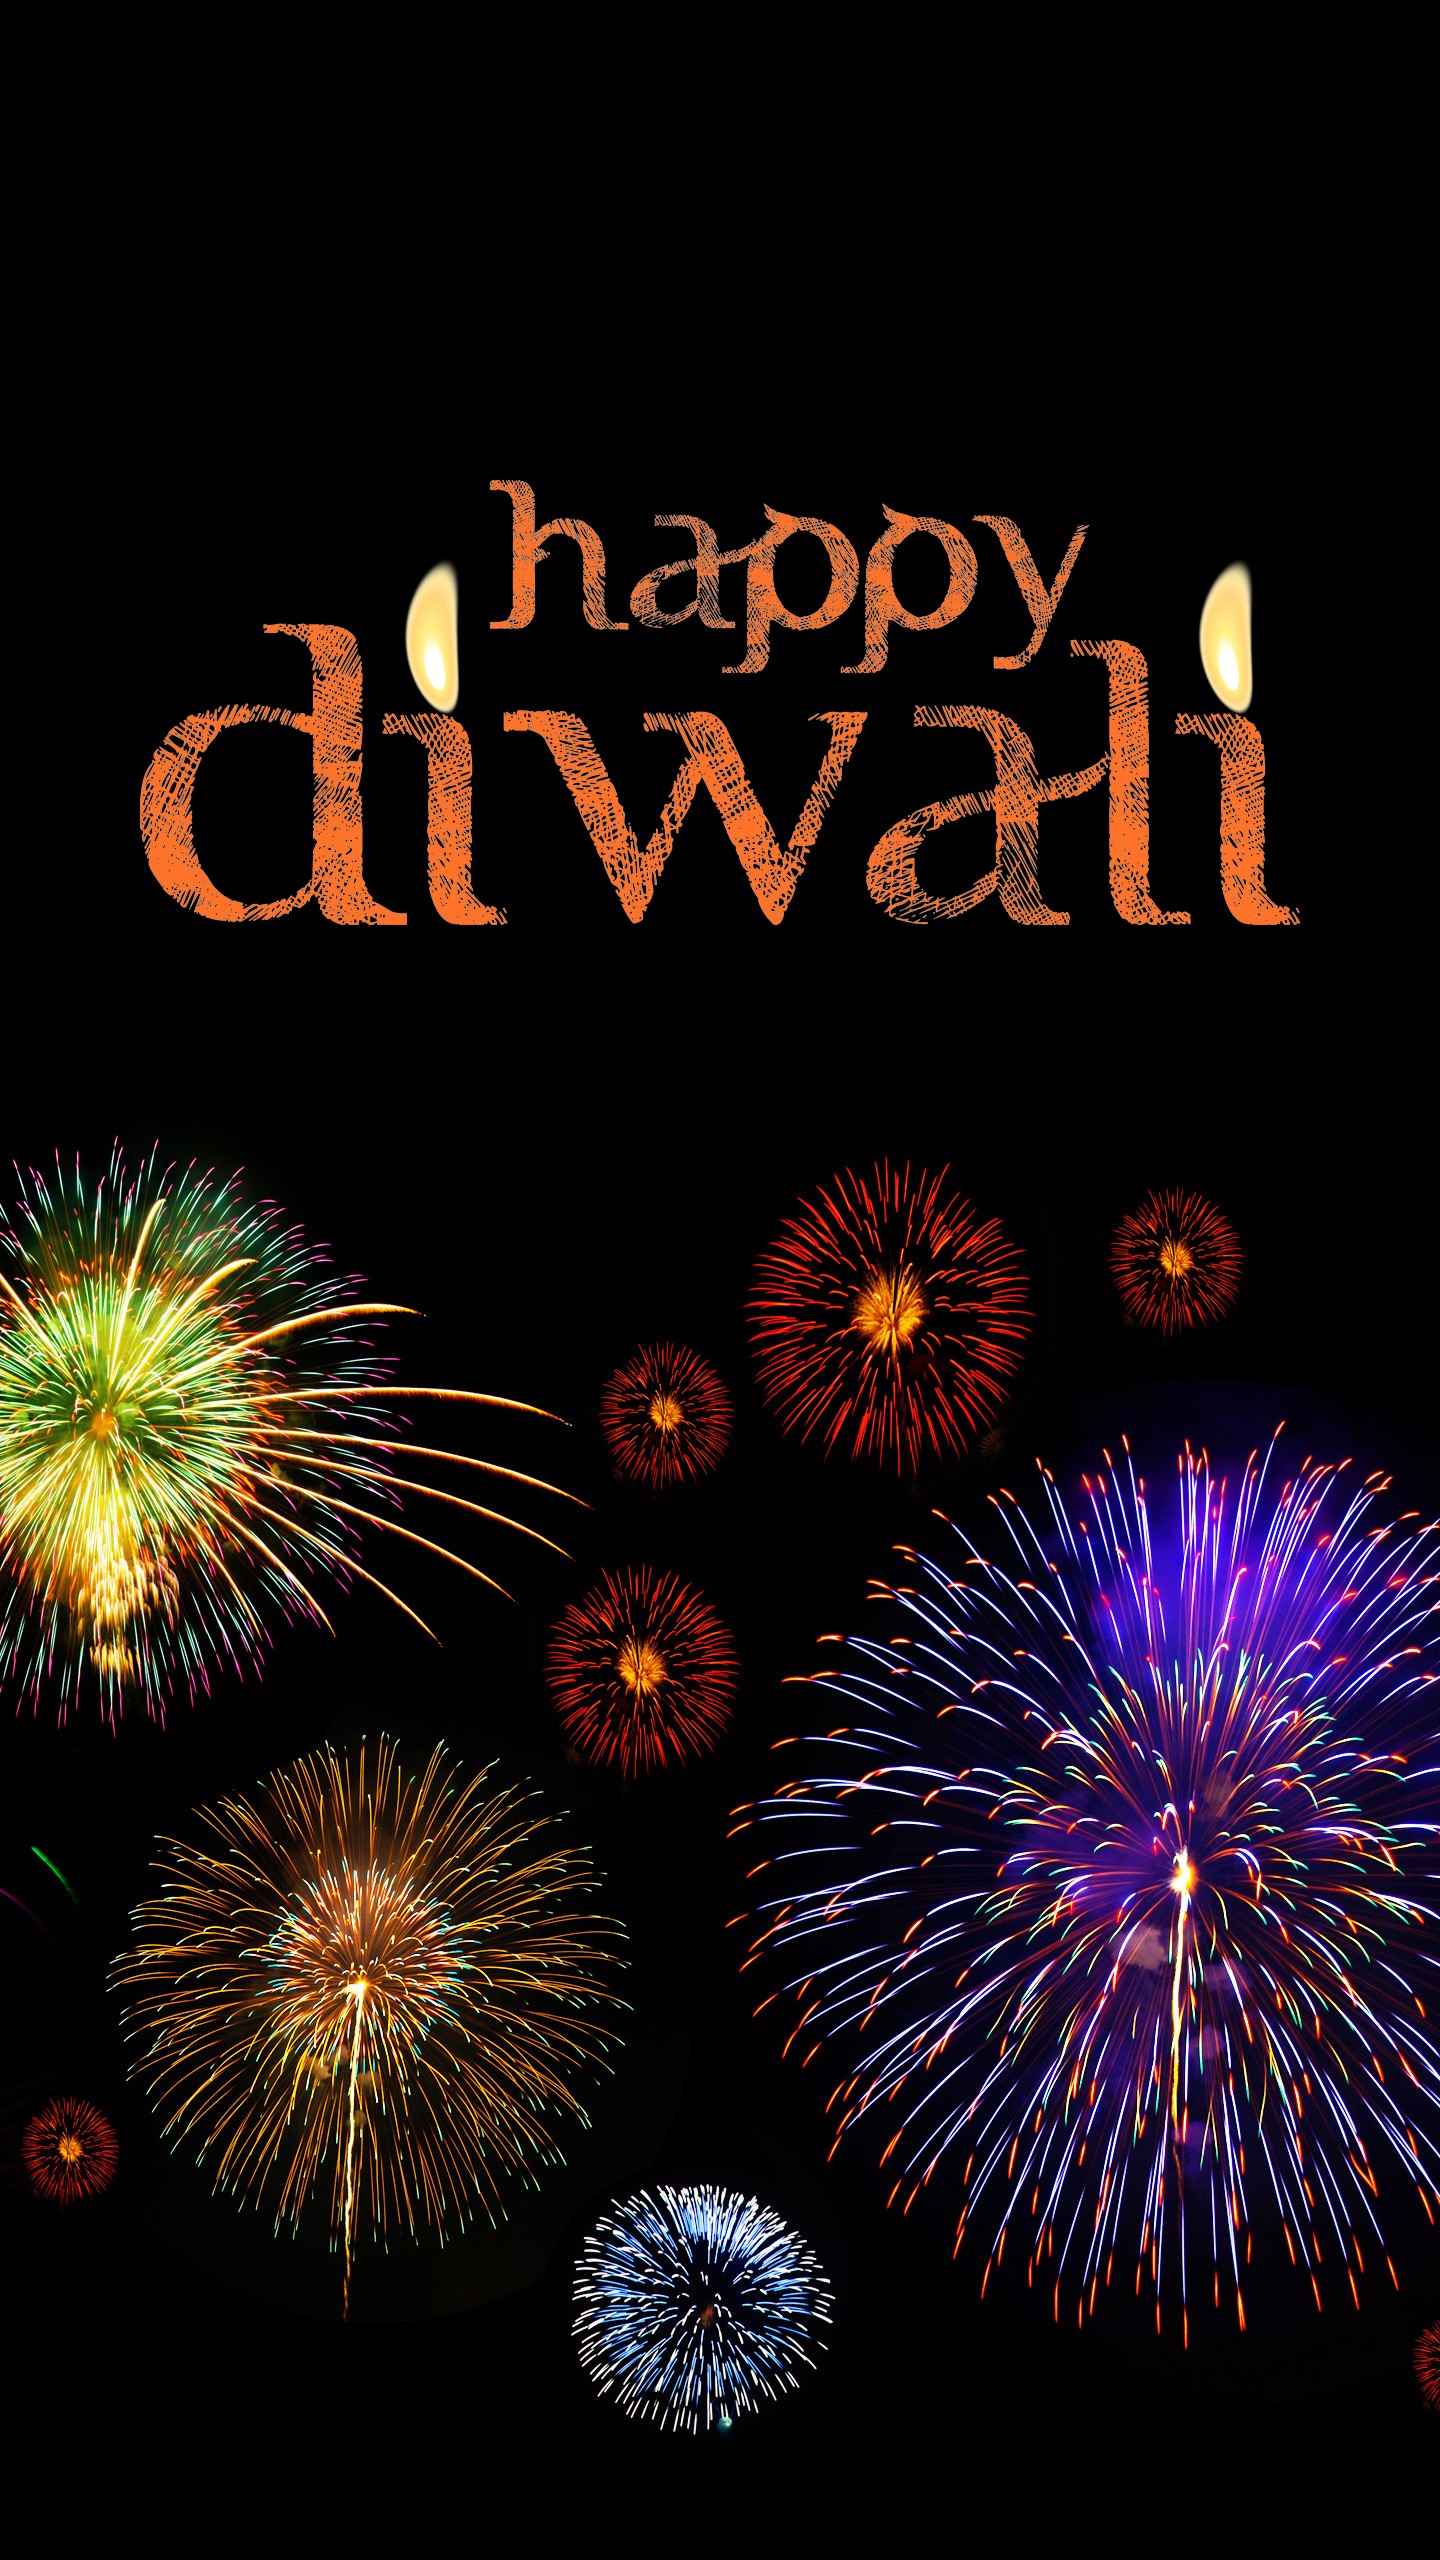 happy diwali wallpaper hd widescreen,fireworks,new years day,new year,event,holiday